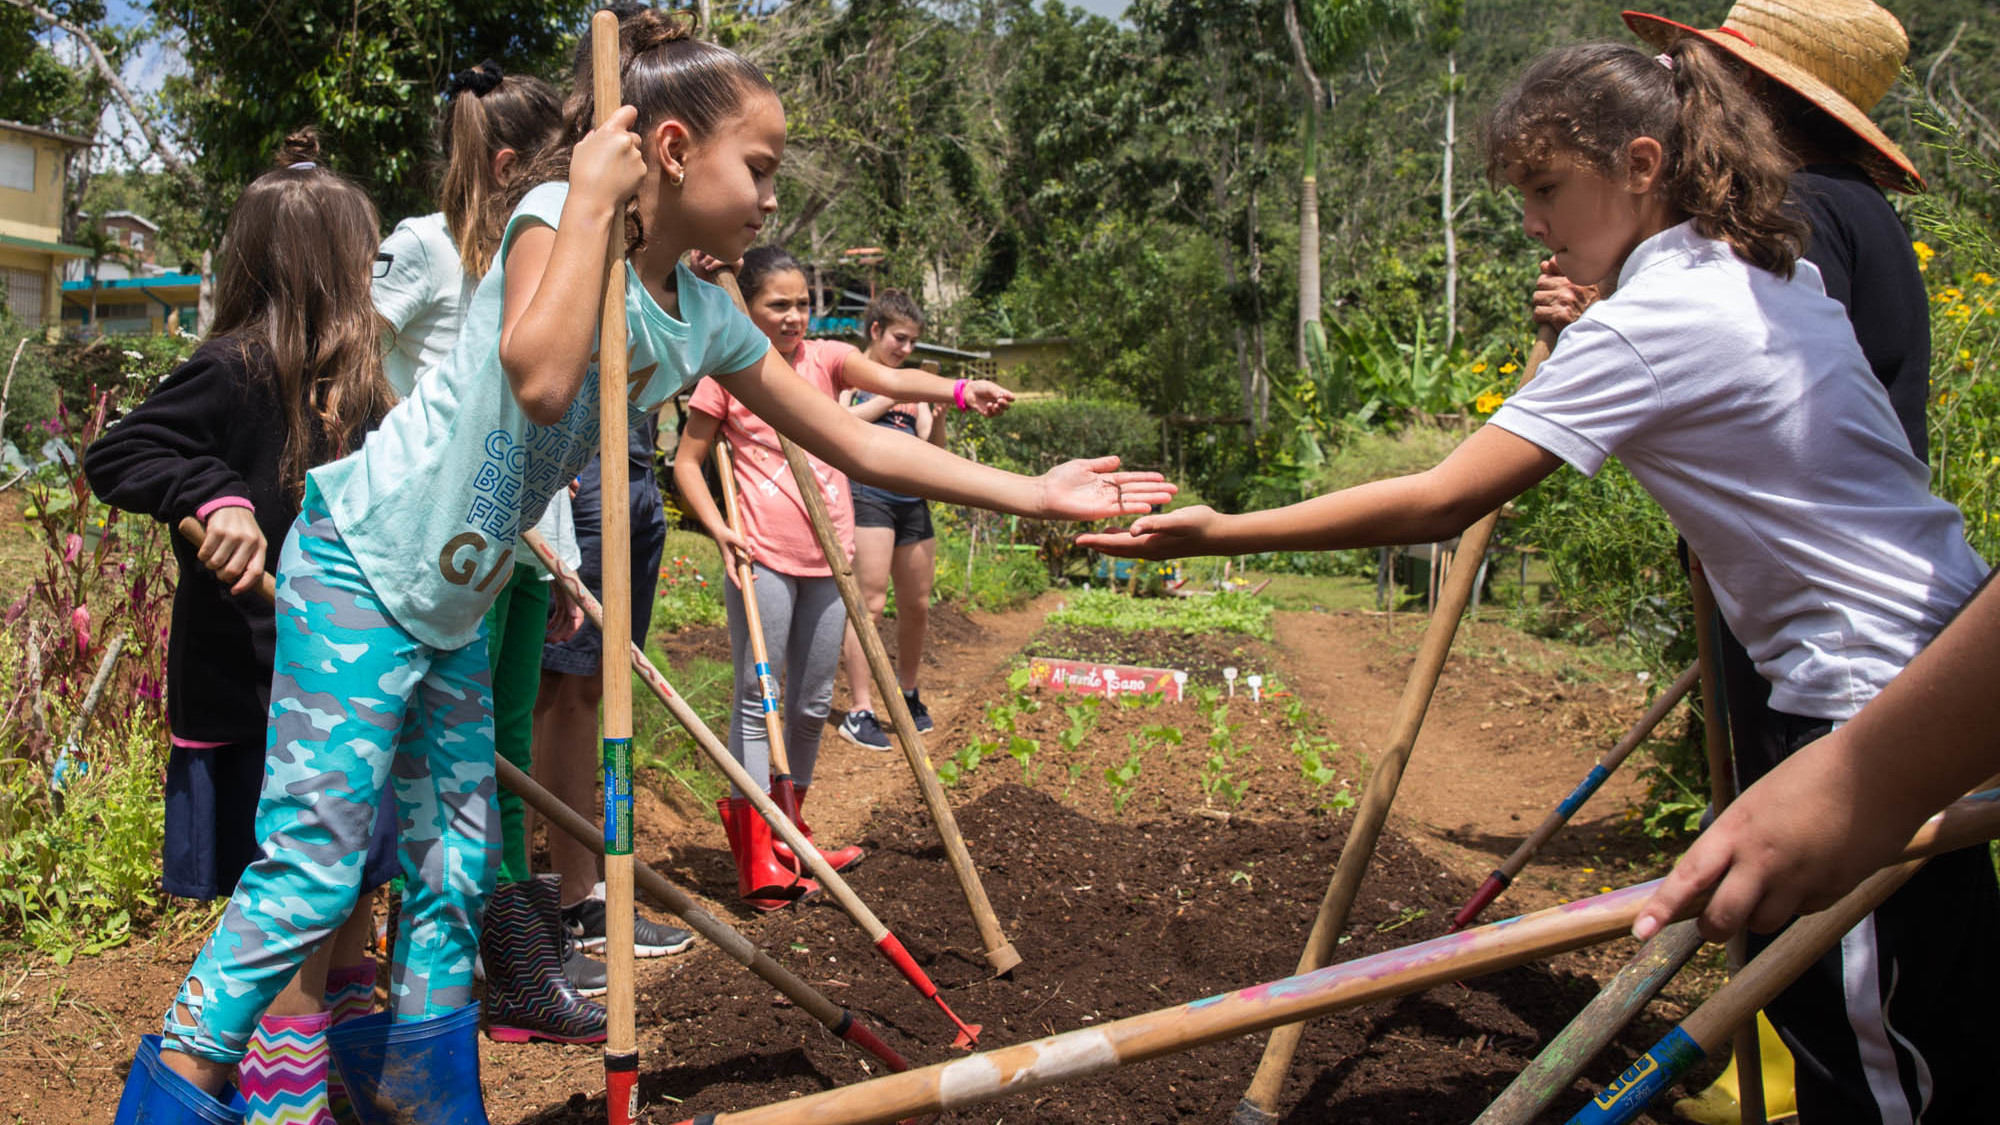 At Botijas Secondary School No. 1, students work with hoes to ready new beds for planting while chanting in Spanish, "Up and down, we prepare the earth."